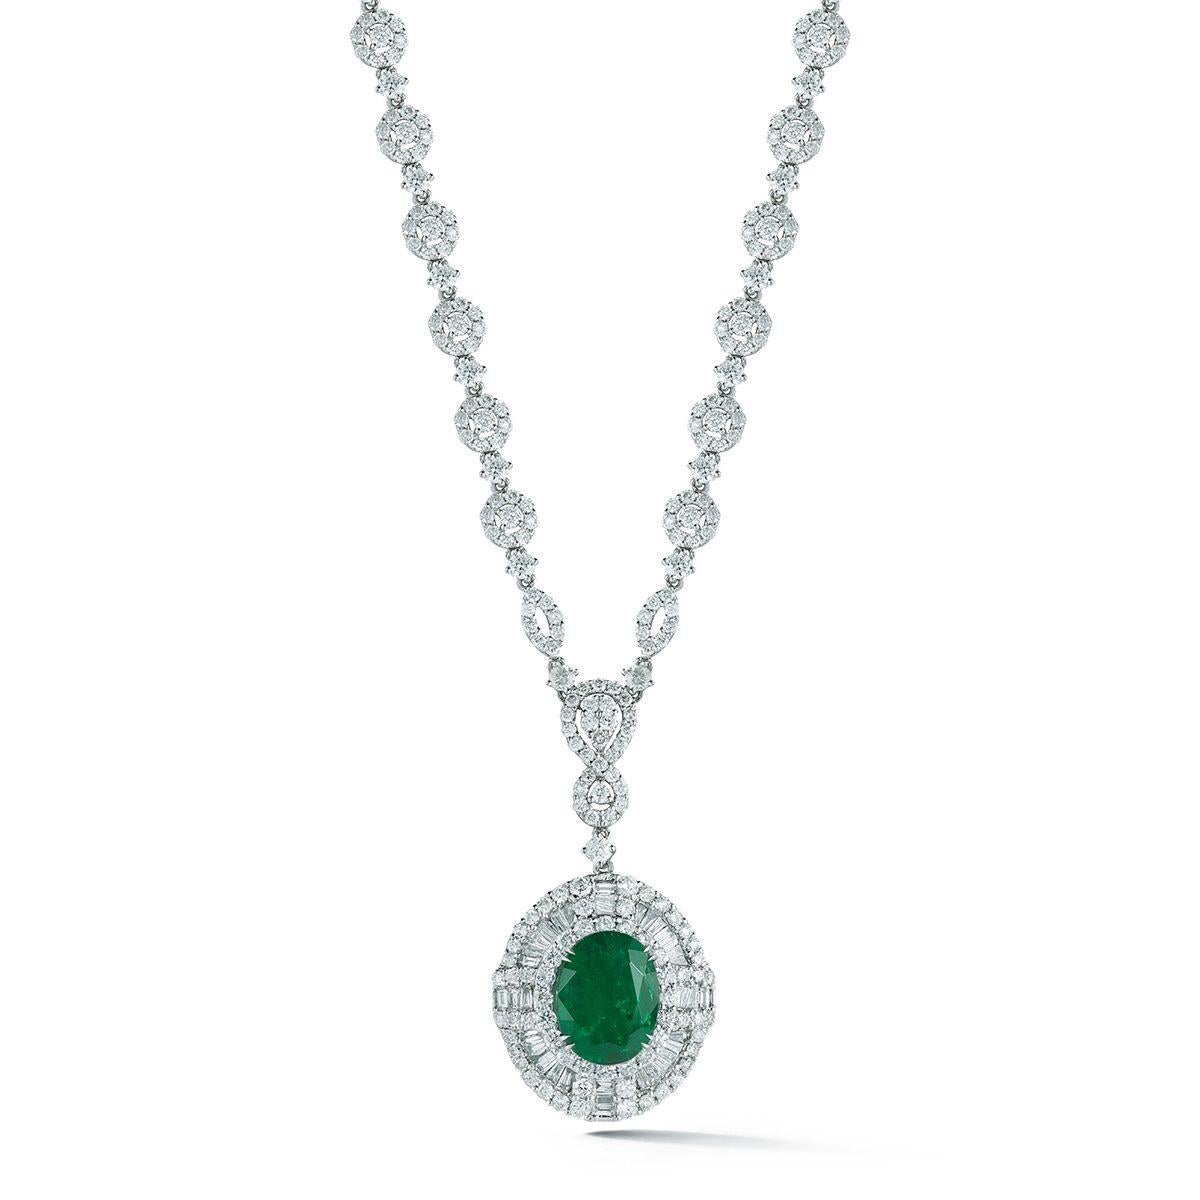 Modern 18k White Gold 4.37ct Emerald And 8.16ct Diamond Necklace For Sale